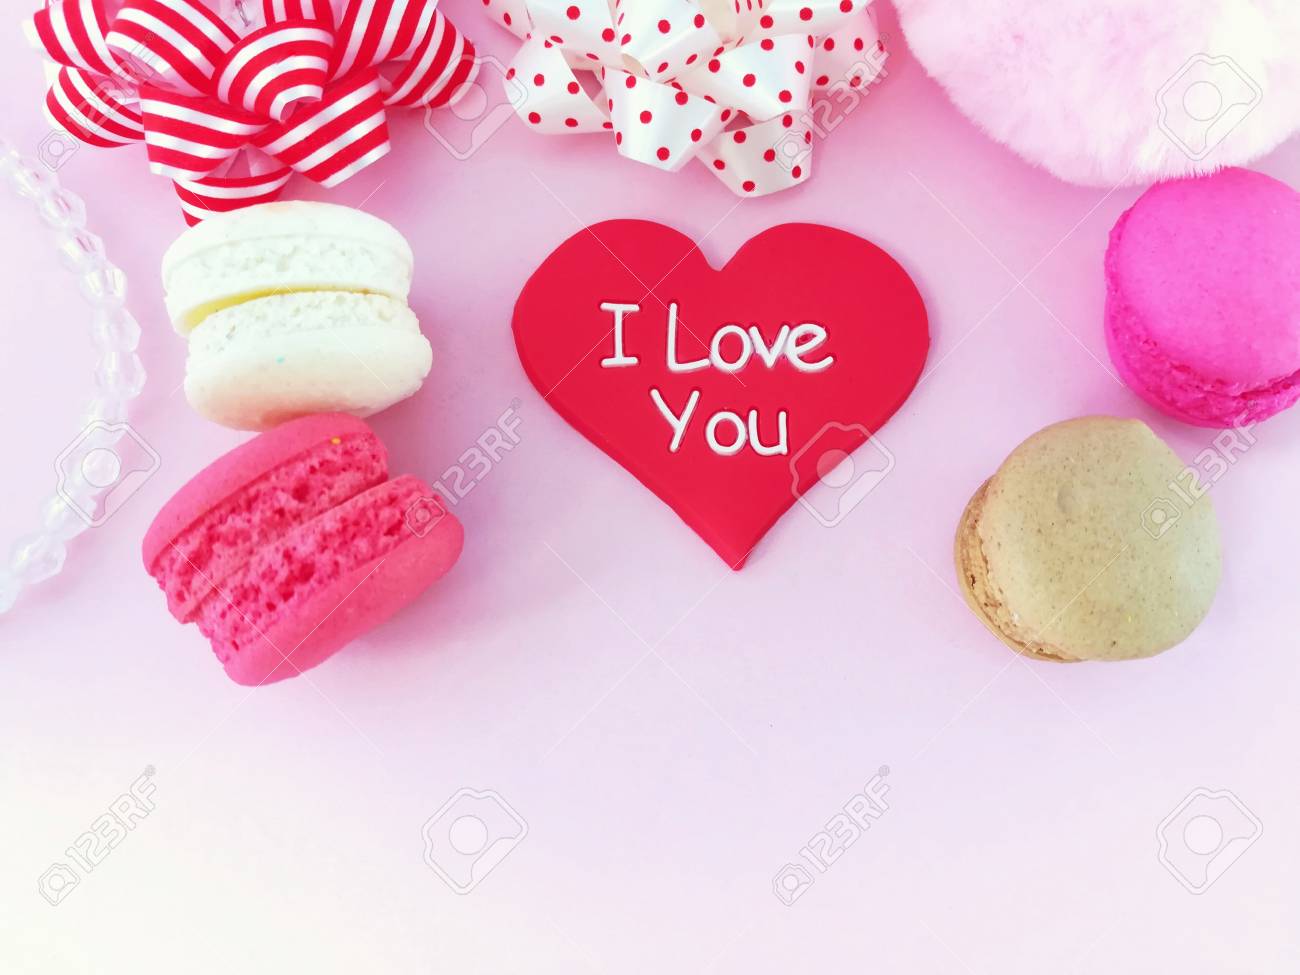 Decoration Beautiful Wallpaper With Delicious Macaron Red Heart